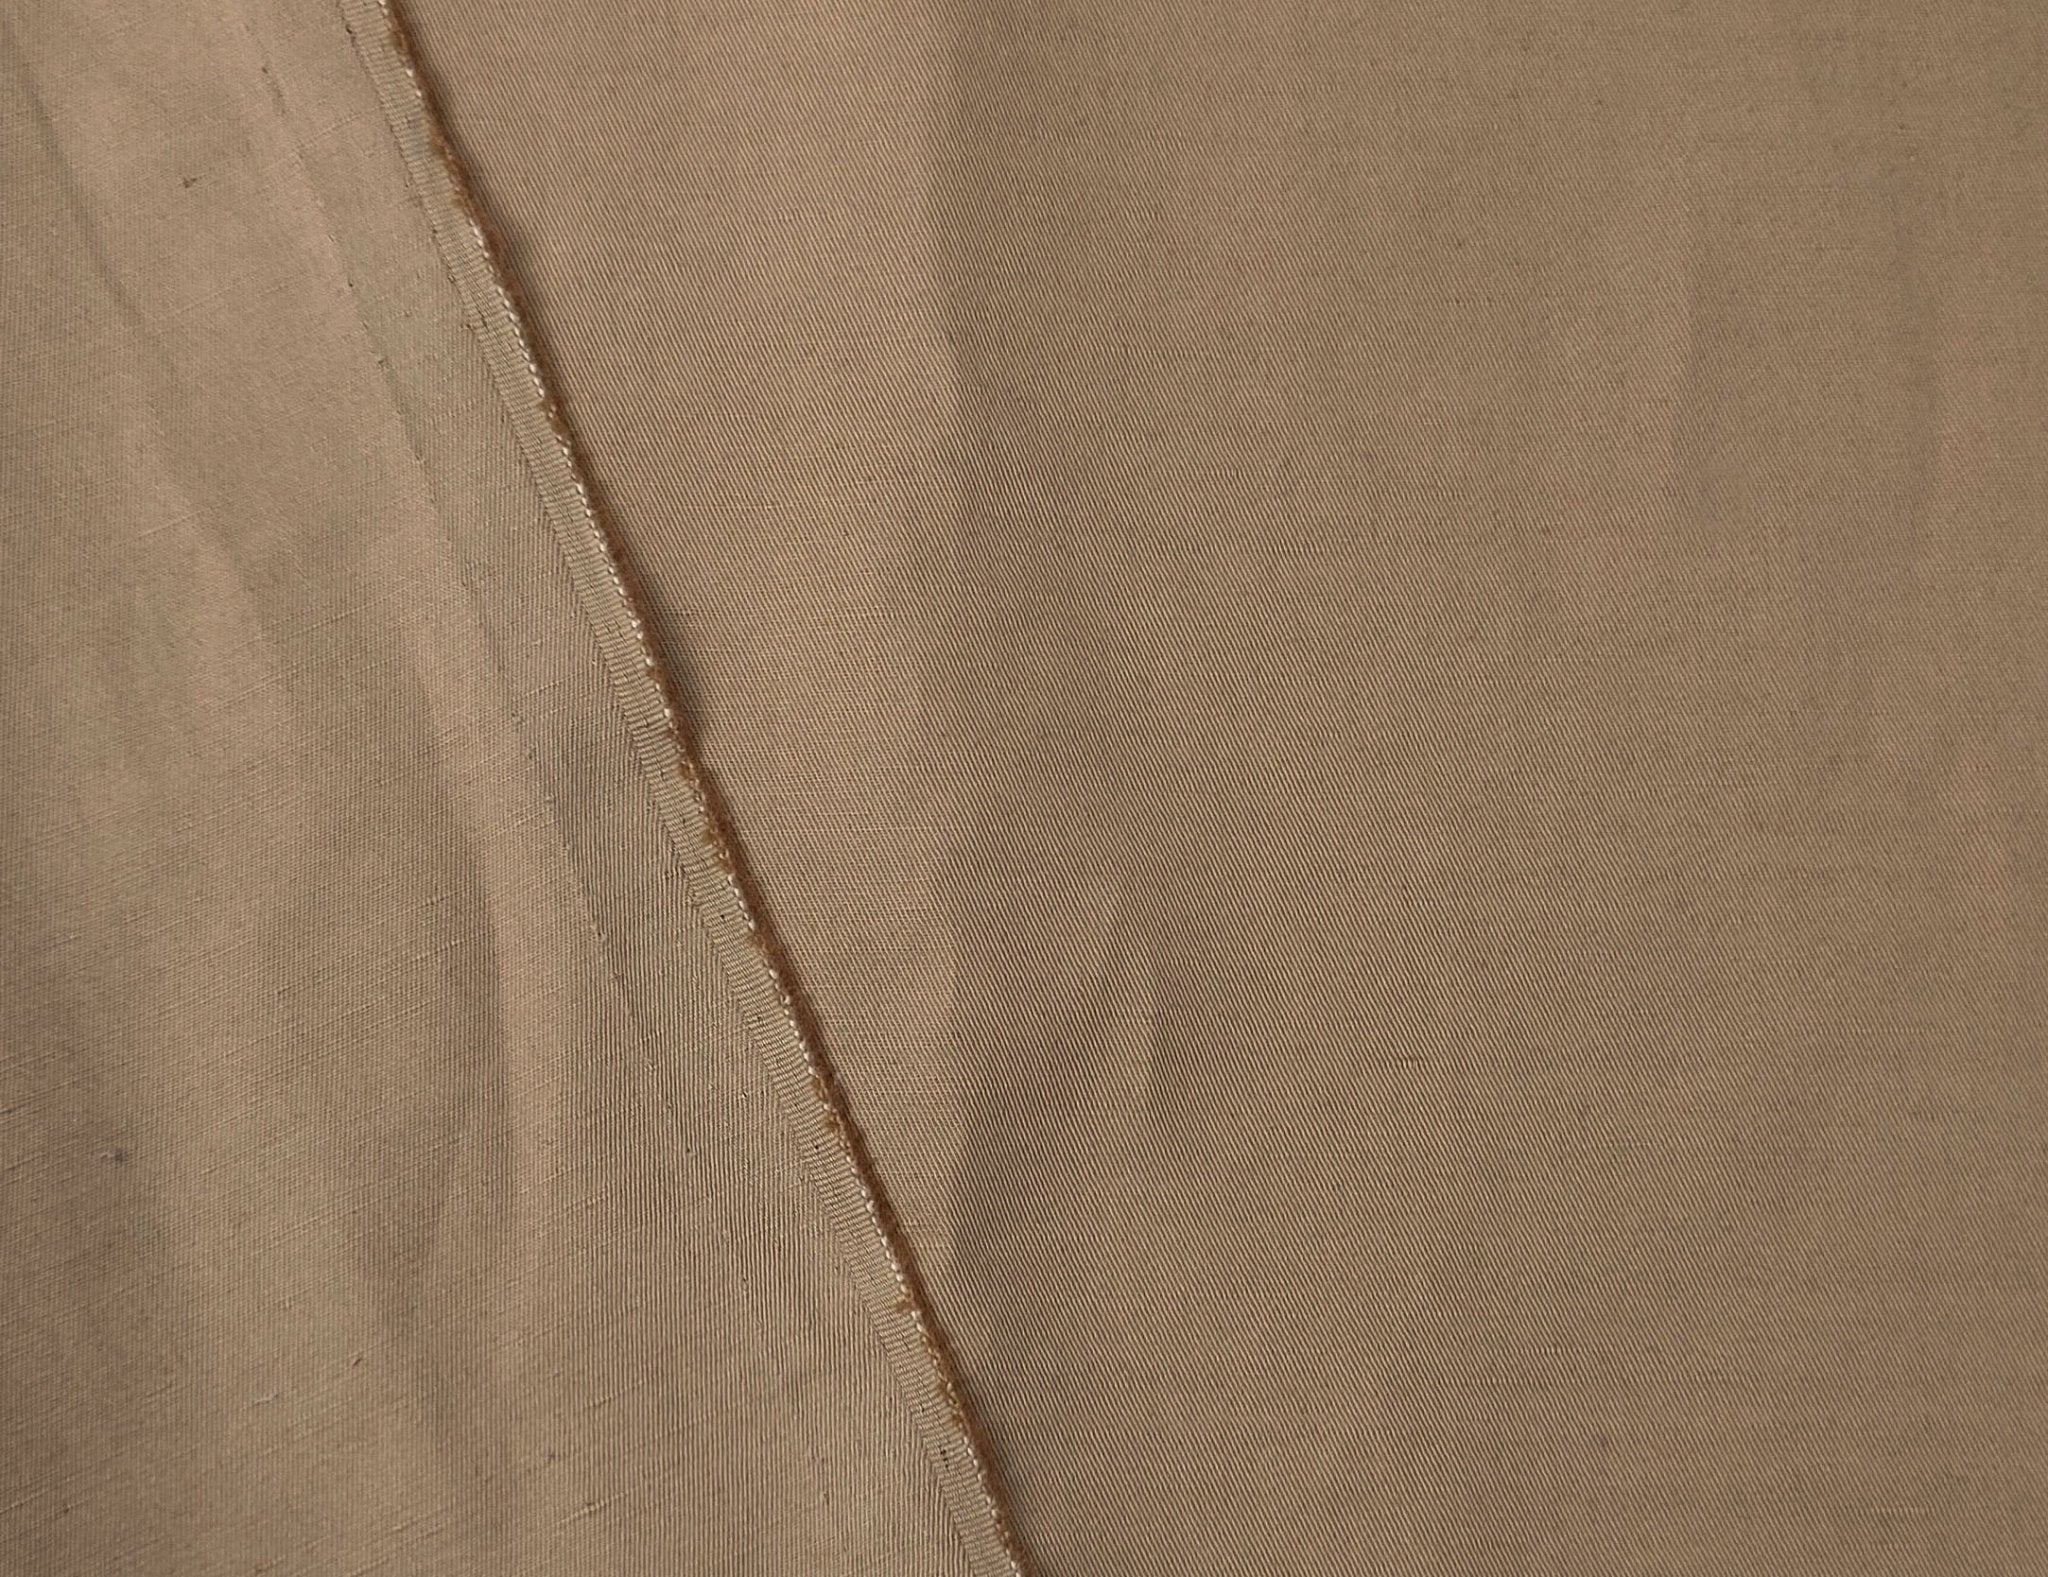 Linen Cotton Compact Twill Solid Fabric 3154 - The Linen Lab - Beige